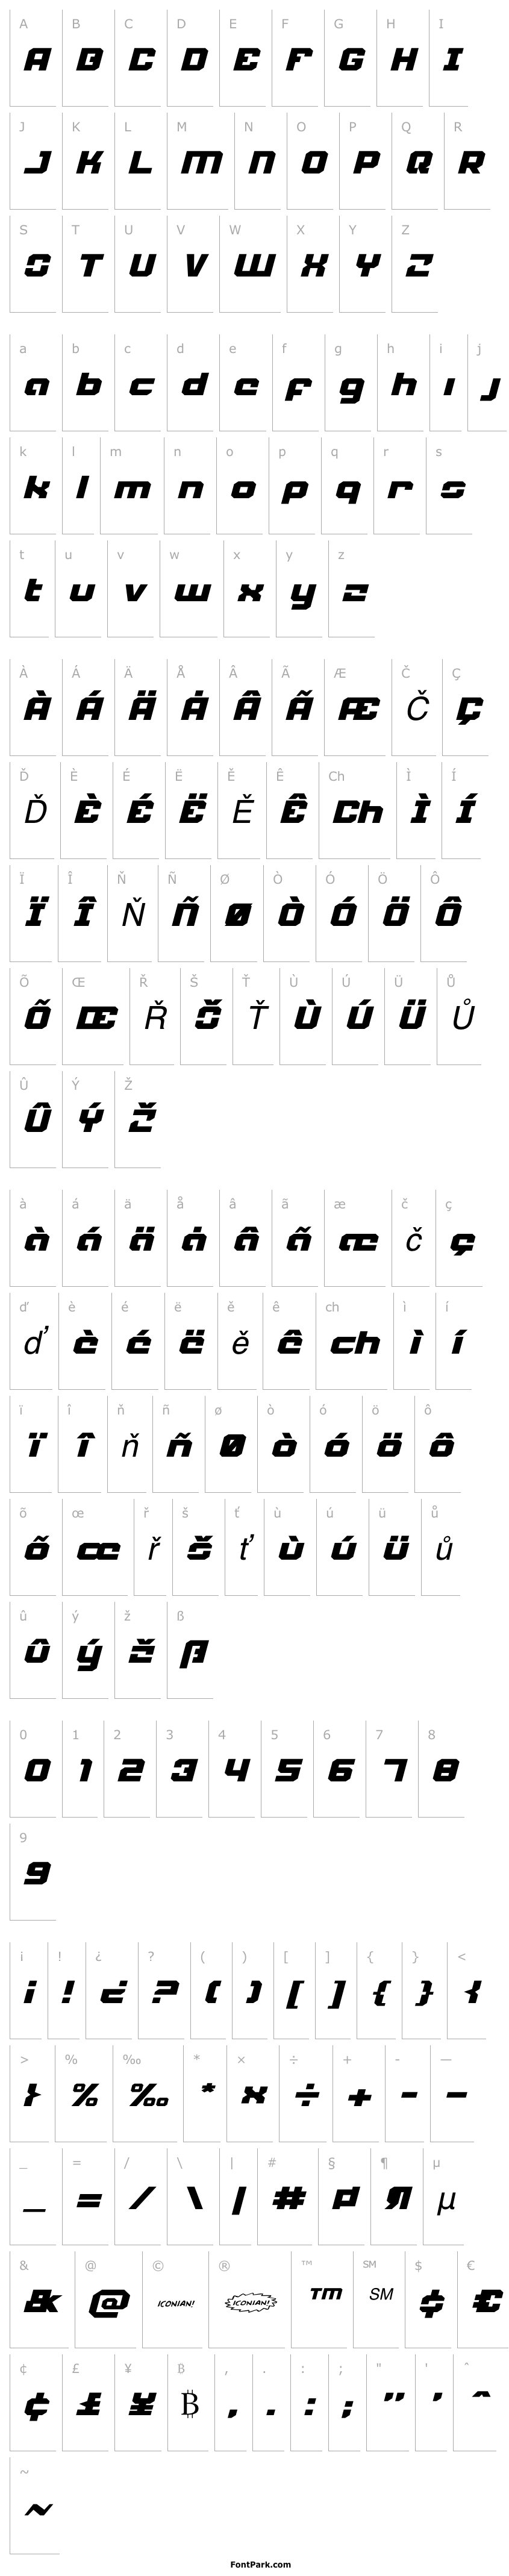 Overview Weaponeer Expanded Italic